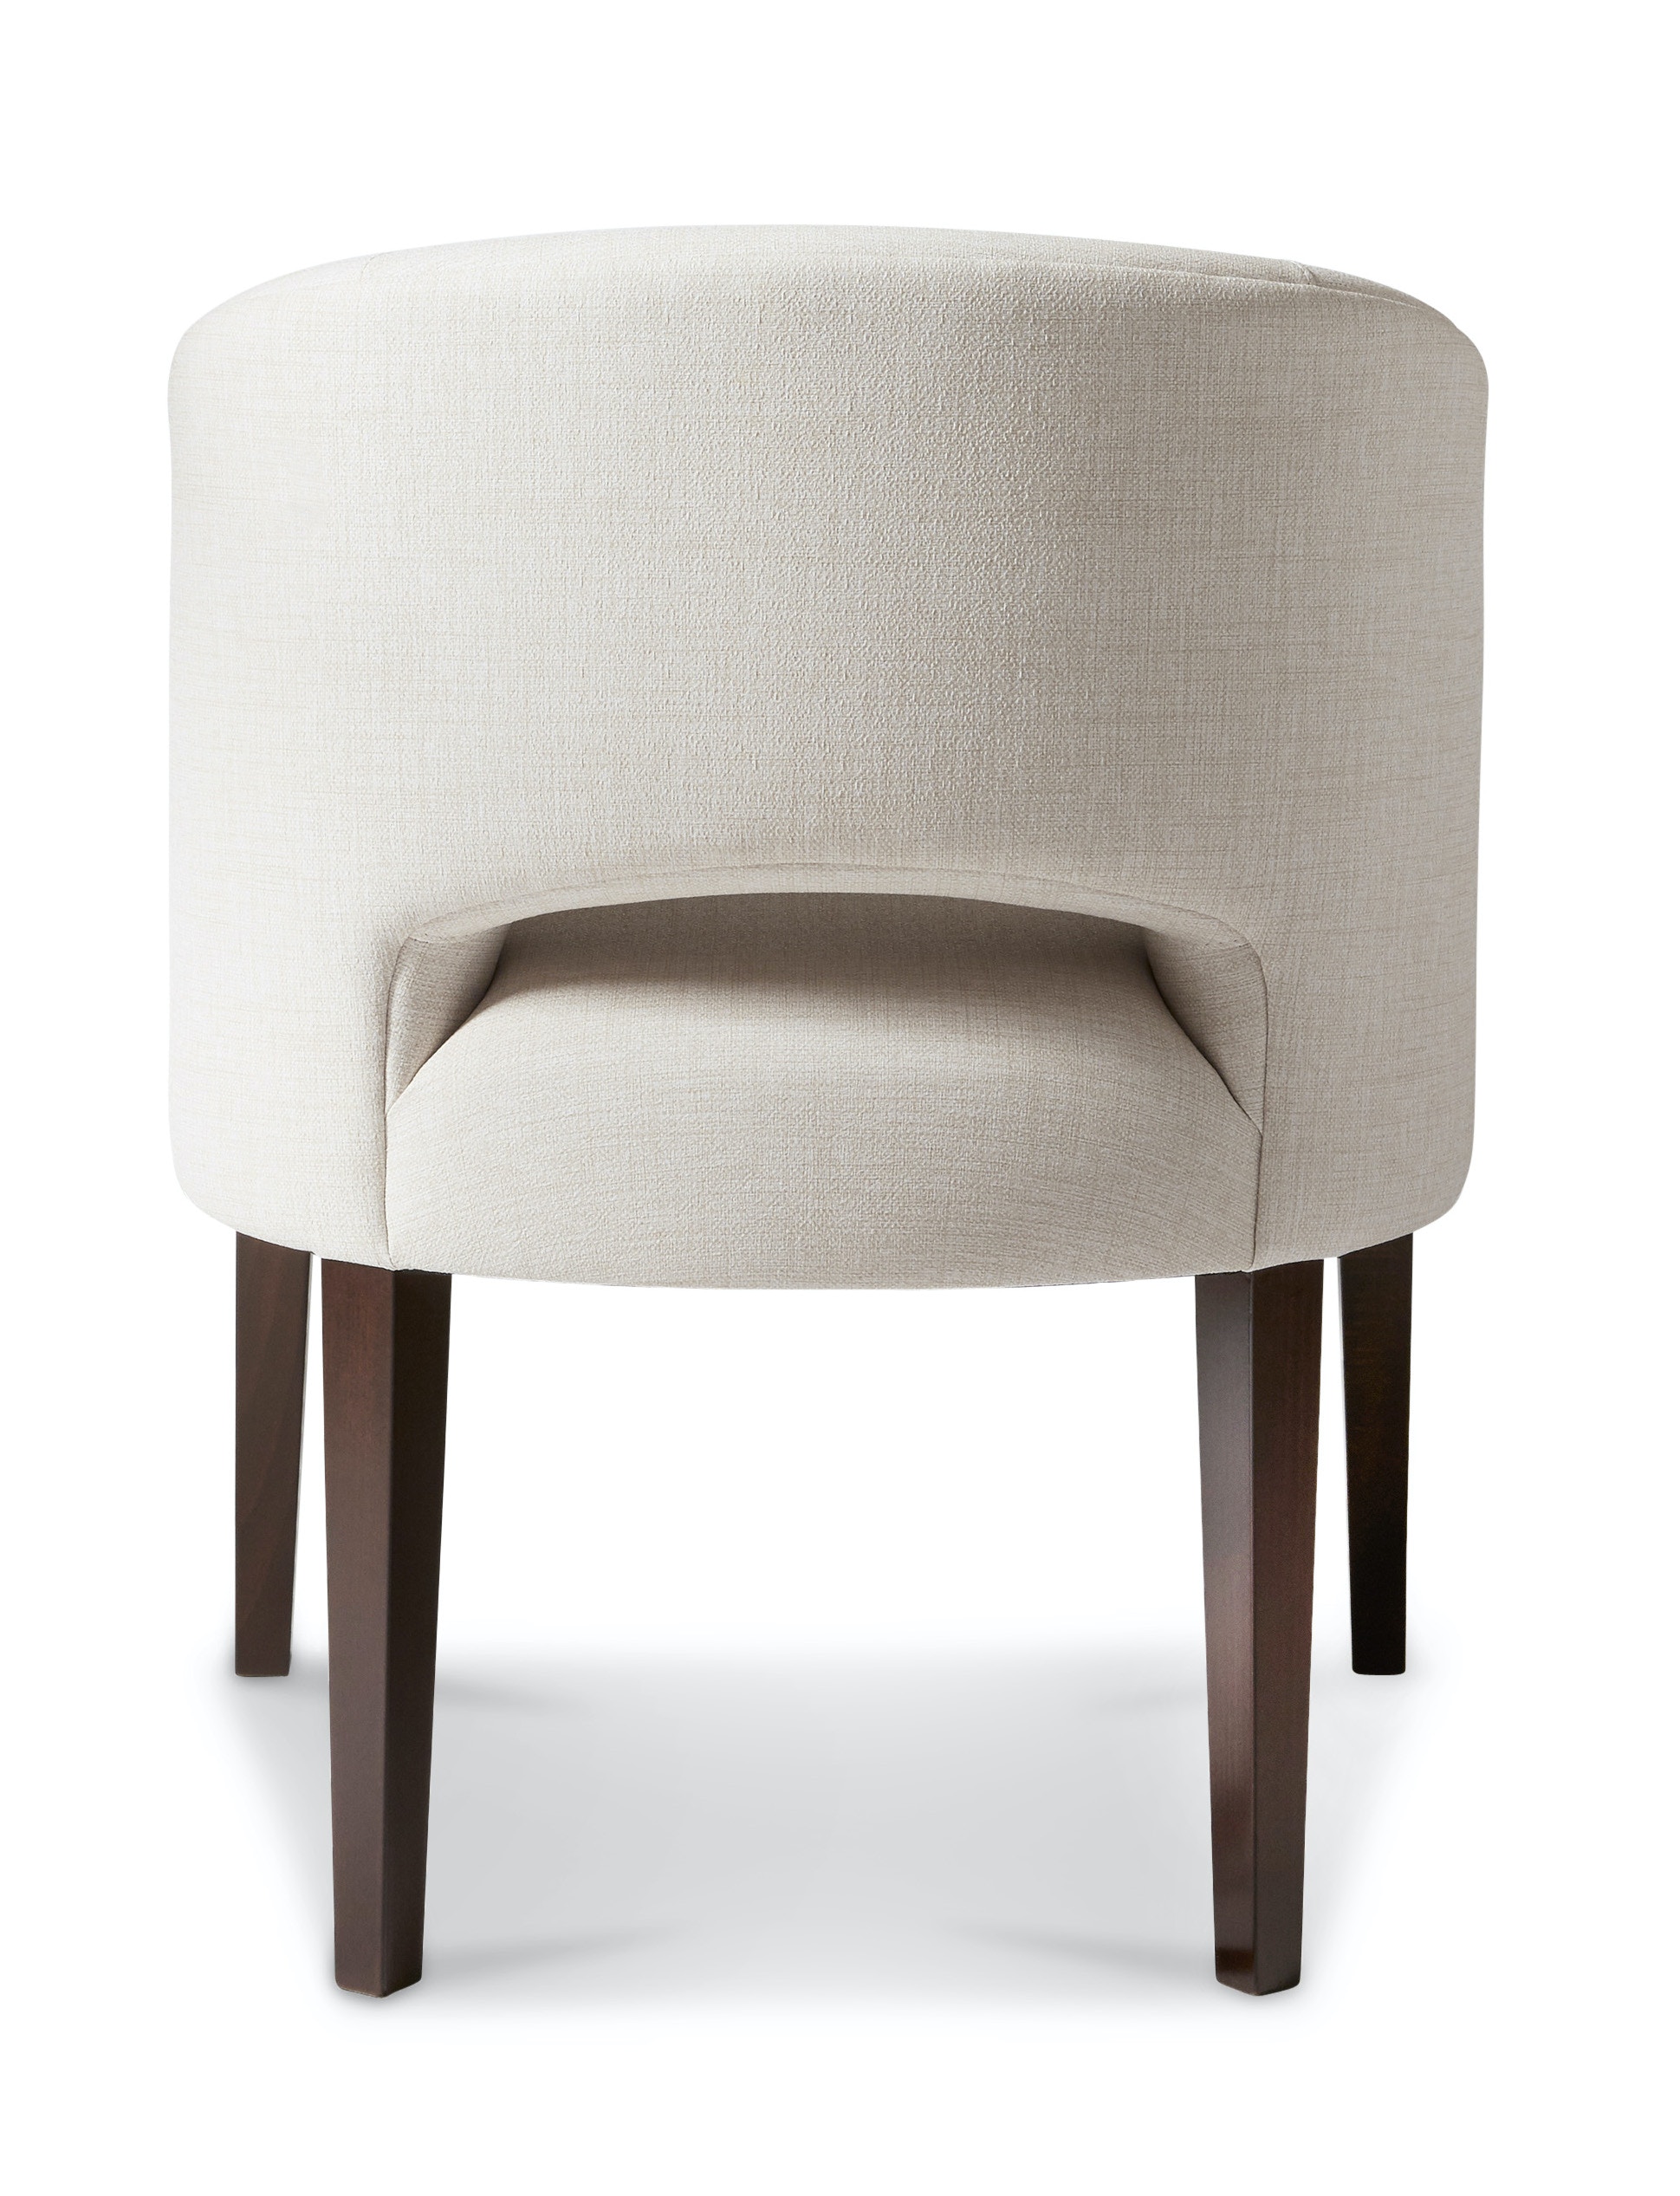 H Contract Dalton Dining Chair HC5127-D - H Contract Furniture 